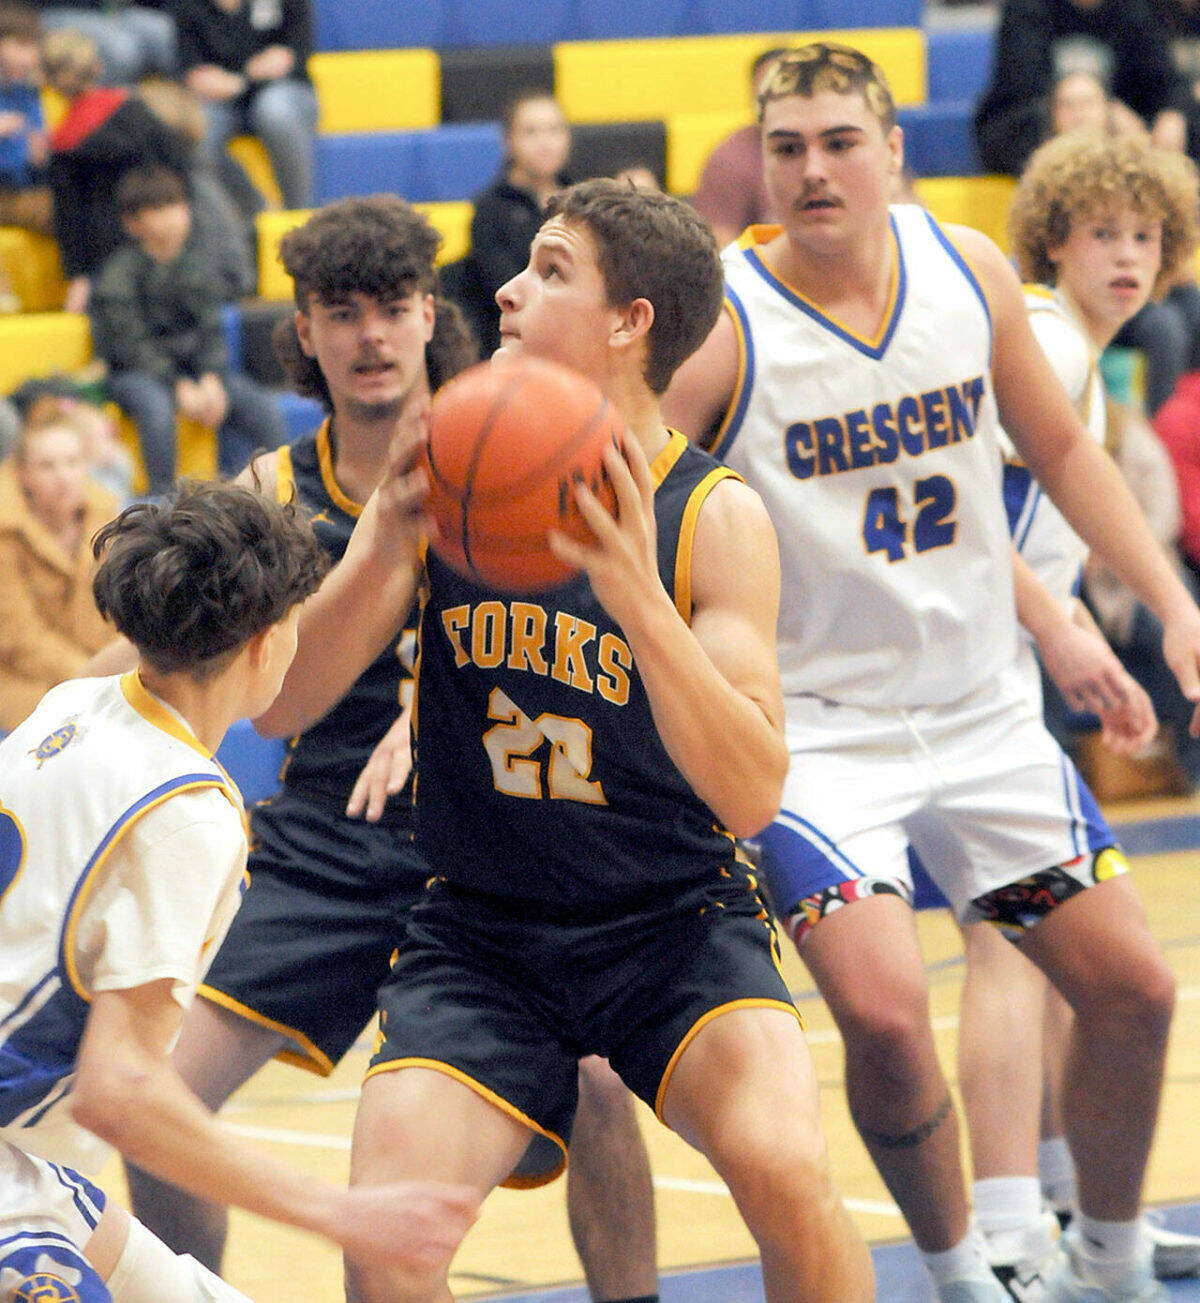 Forks’ Brody Lausch, center, looks for an opening surrounded by, clockwise from left, Terrell Emery of Crescent, LandinDavis of Forks, and Conner Ferro-May and Henry Bourm of Crescent on Wednesday in Joyce. (Keith Thorpe/Peninsula Daily News)